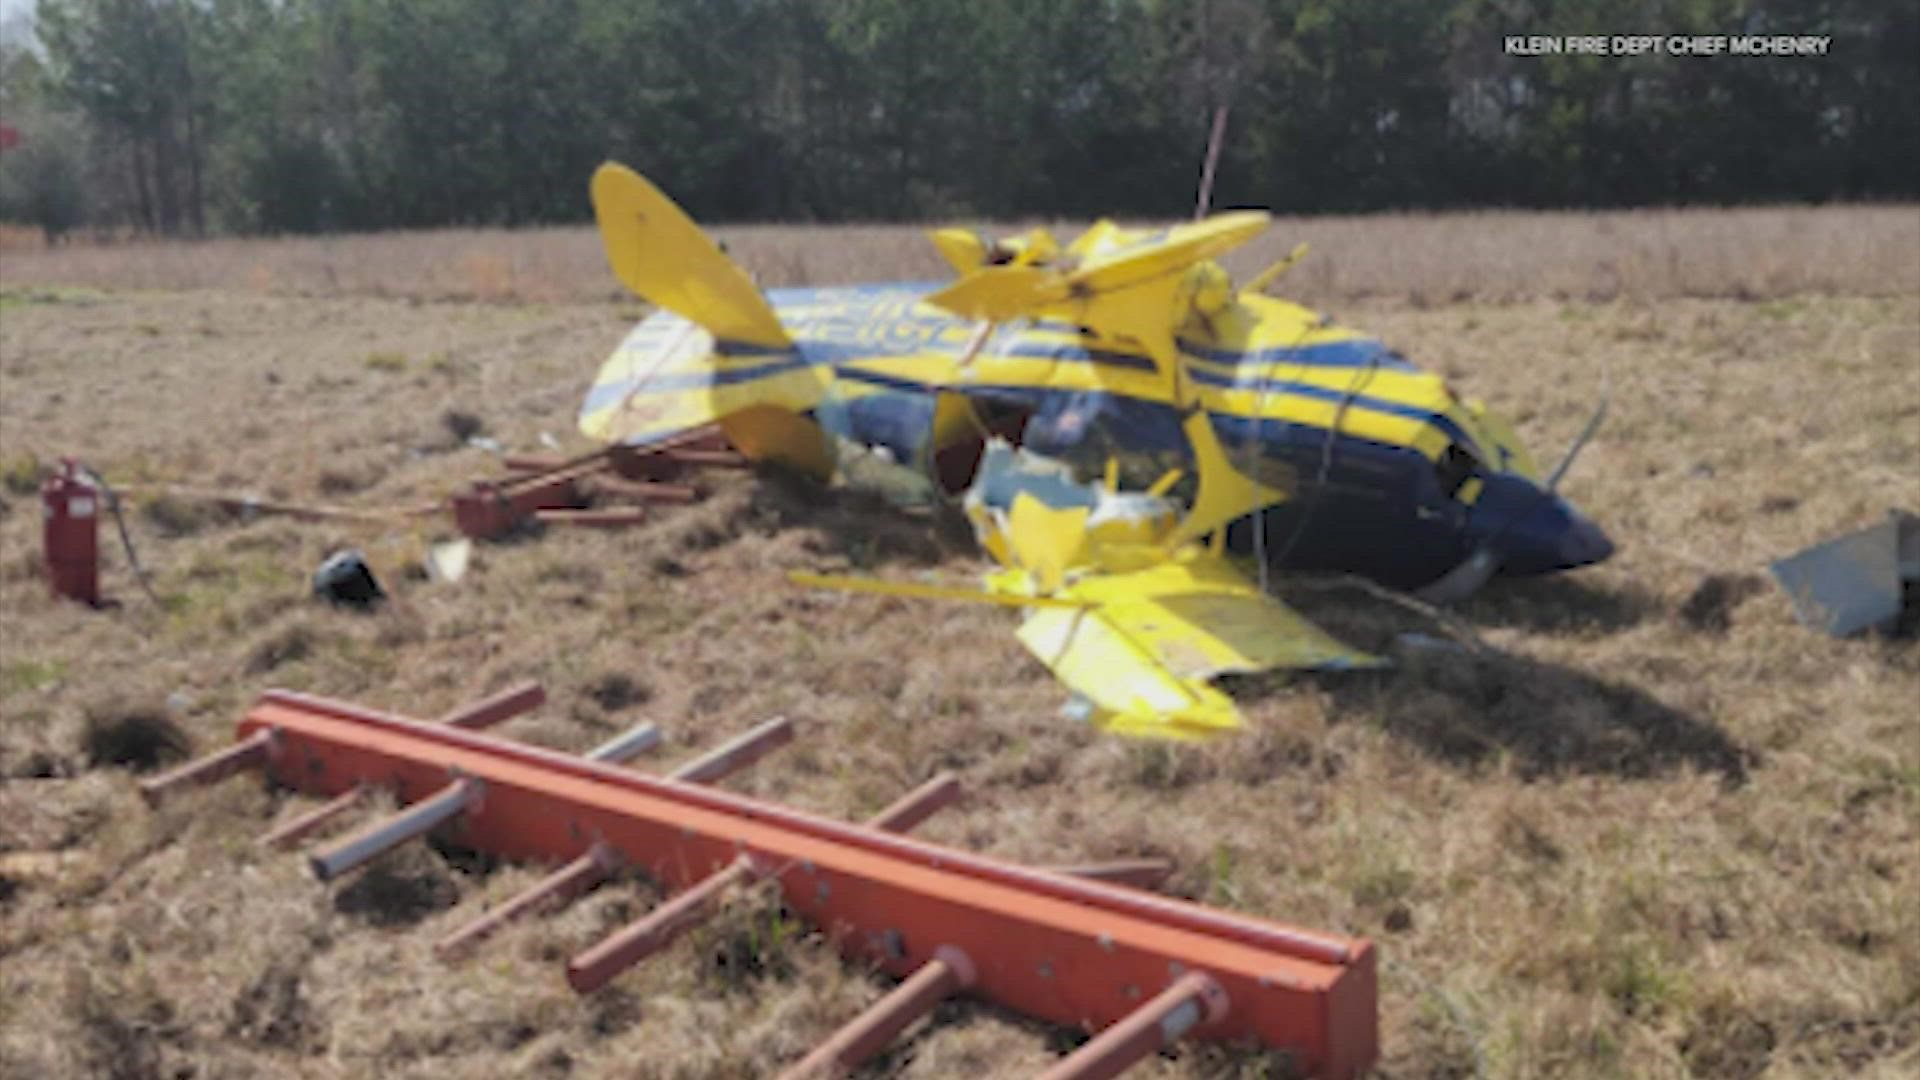 The plane was heavily damaged in the crash. The pilot was taken to an area hospital with non-life-threatening injuries, according to authorities.